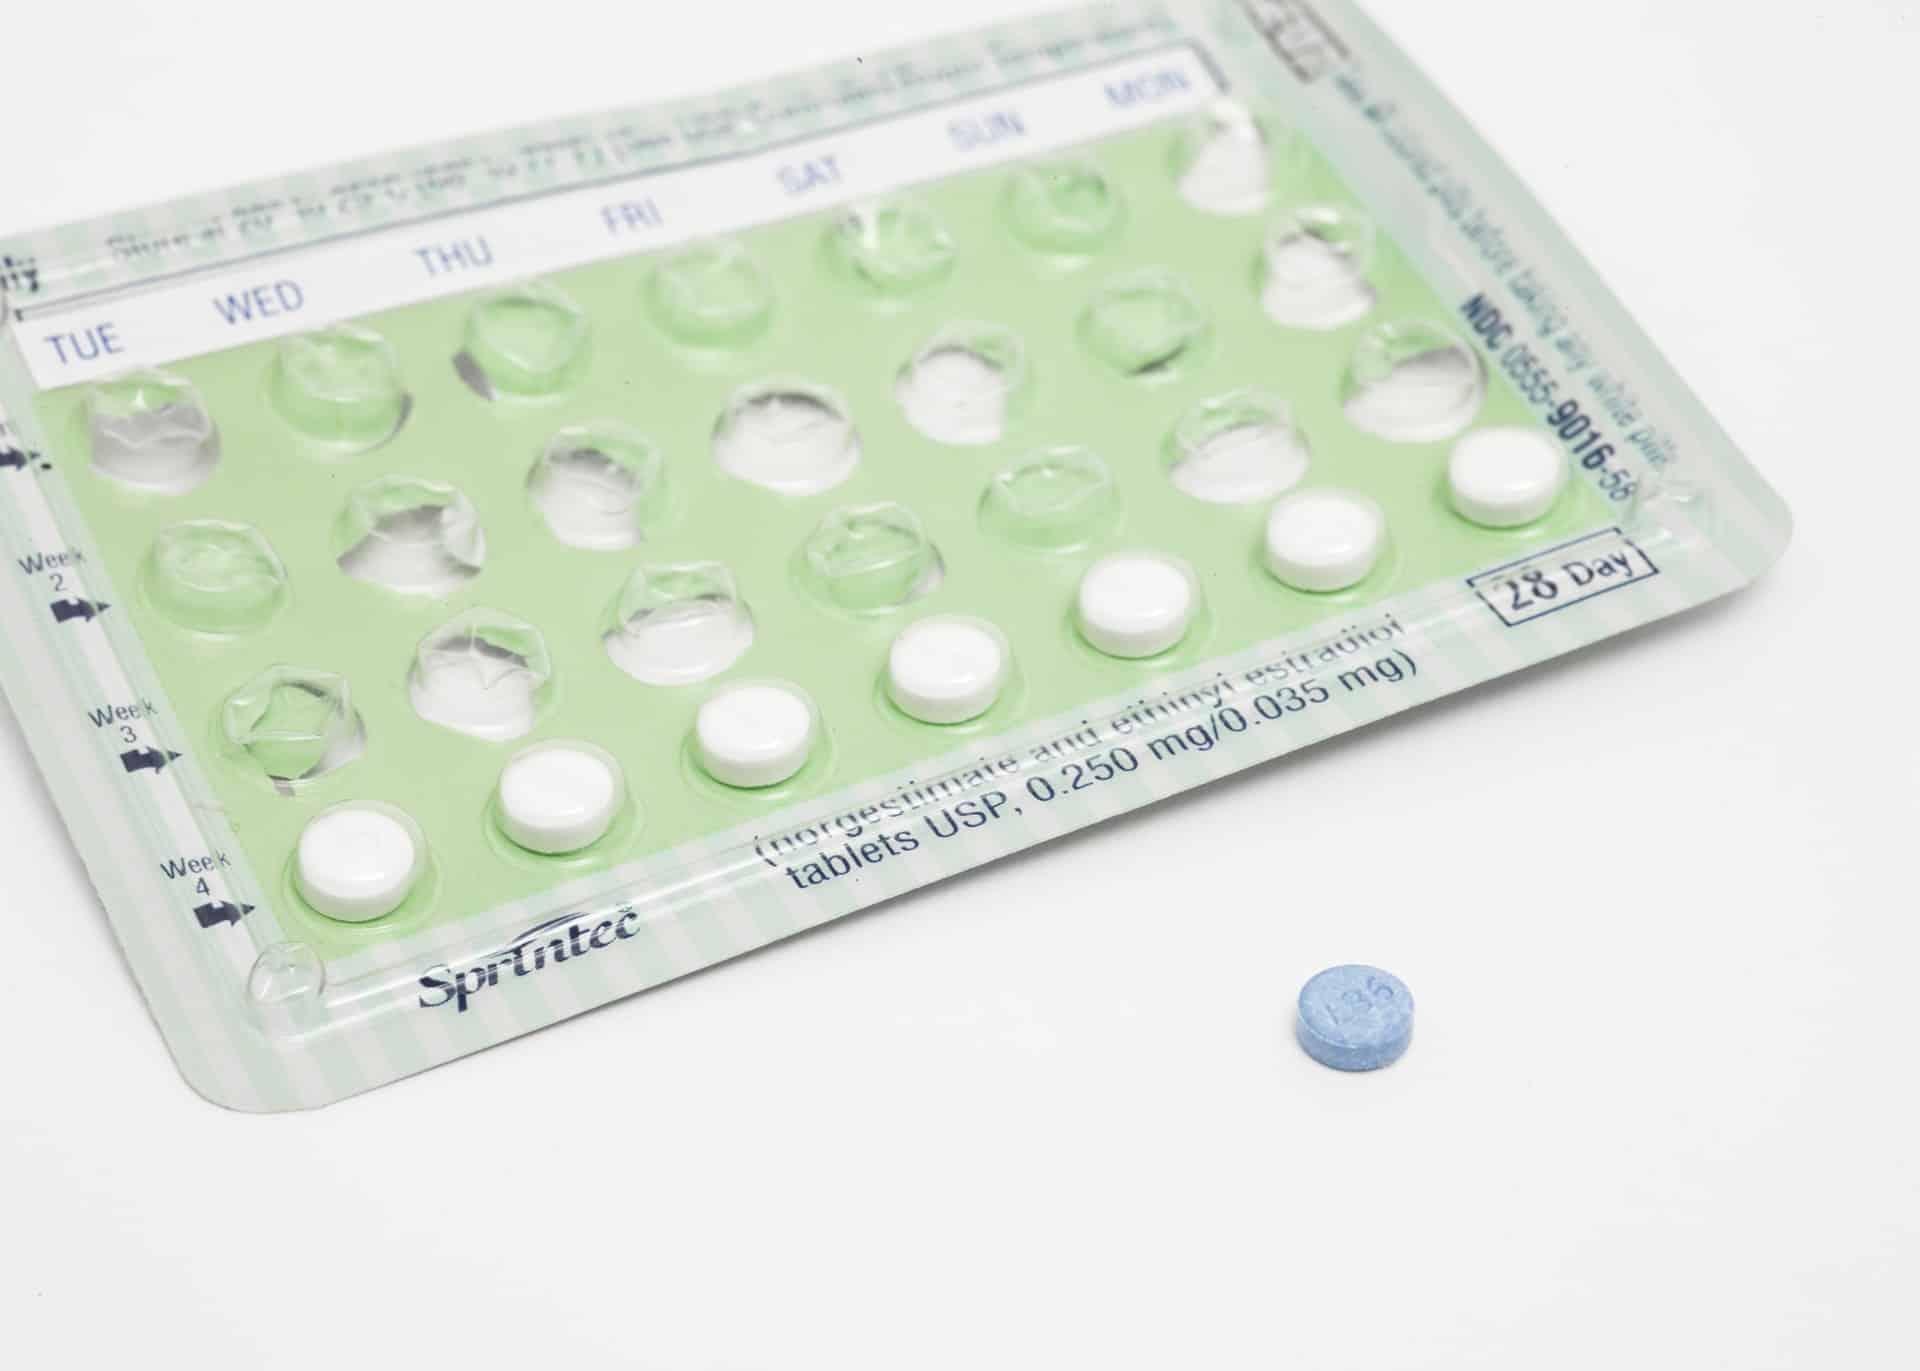 When to stop birth control pills if you want to start trying for a child?